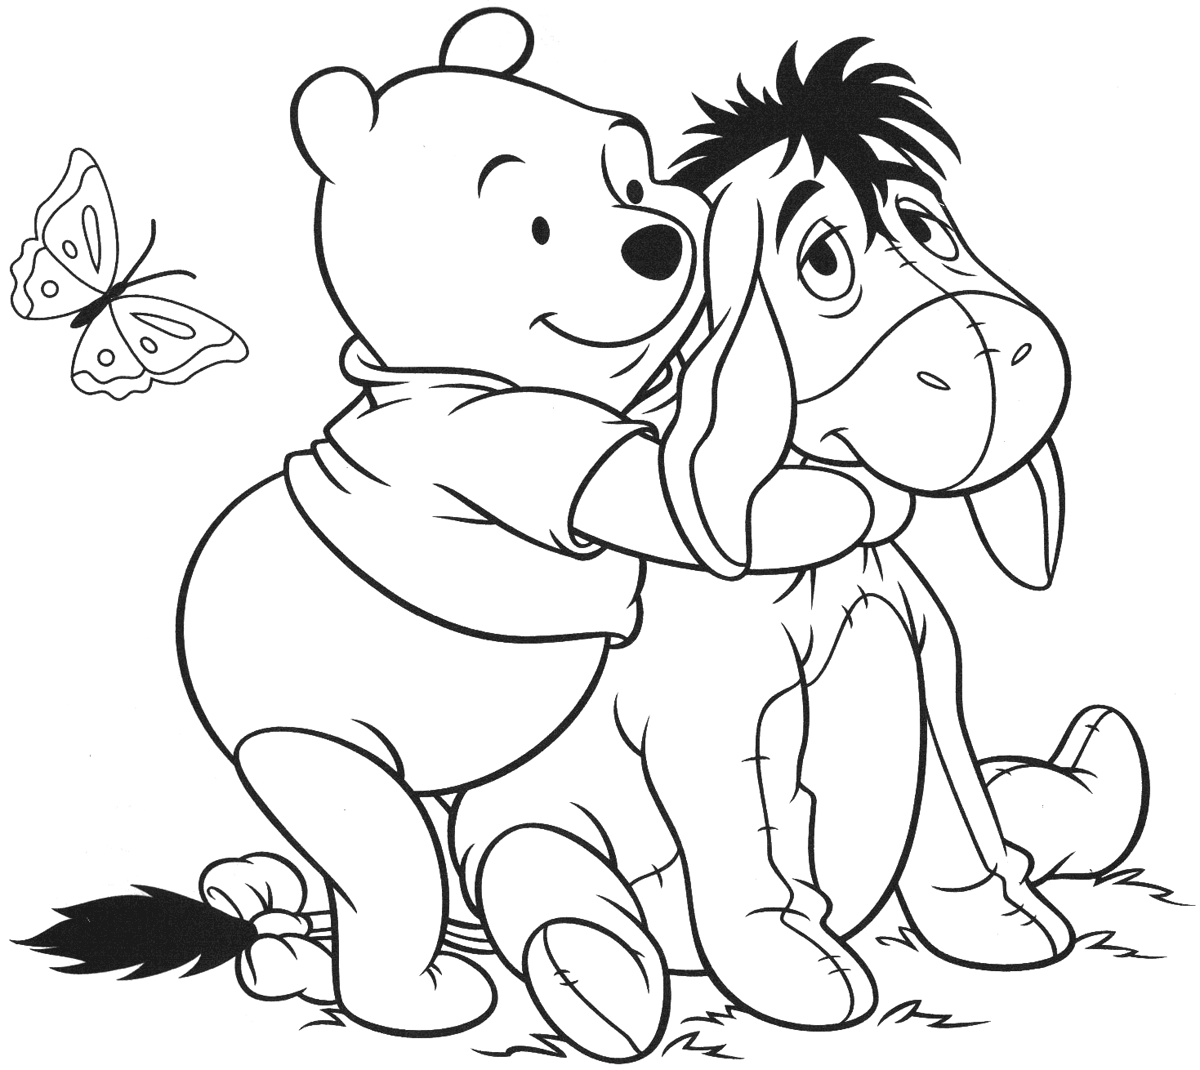 Pooh Hugs For Everyone Coloring Page